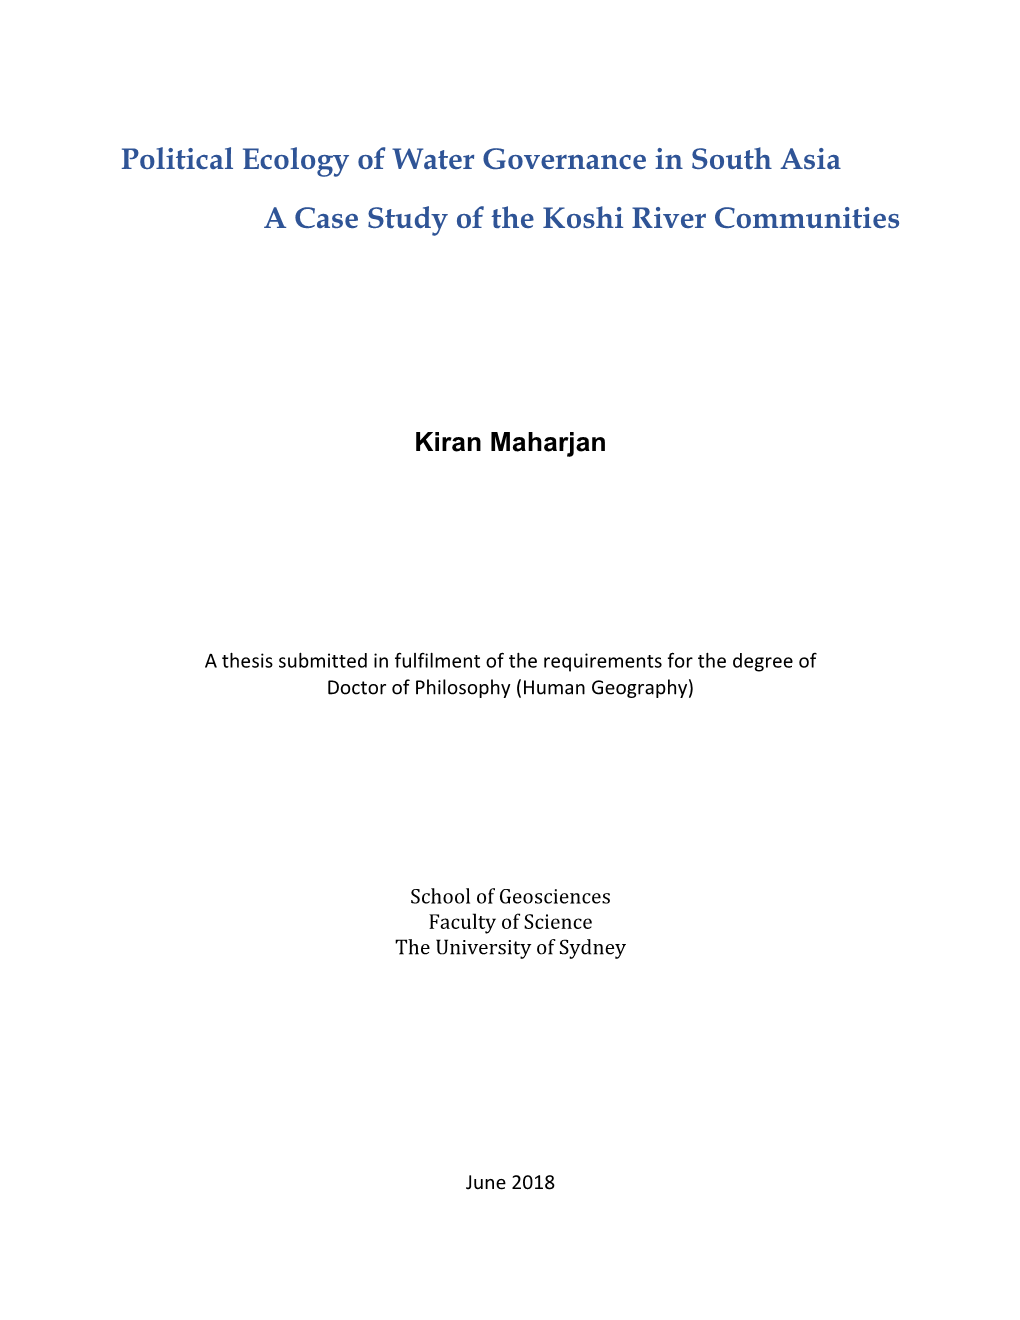 Political Ecology of Water Governance in South Asia a Case Study of the Koshi River Communities